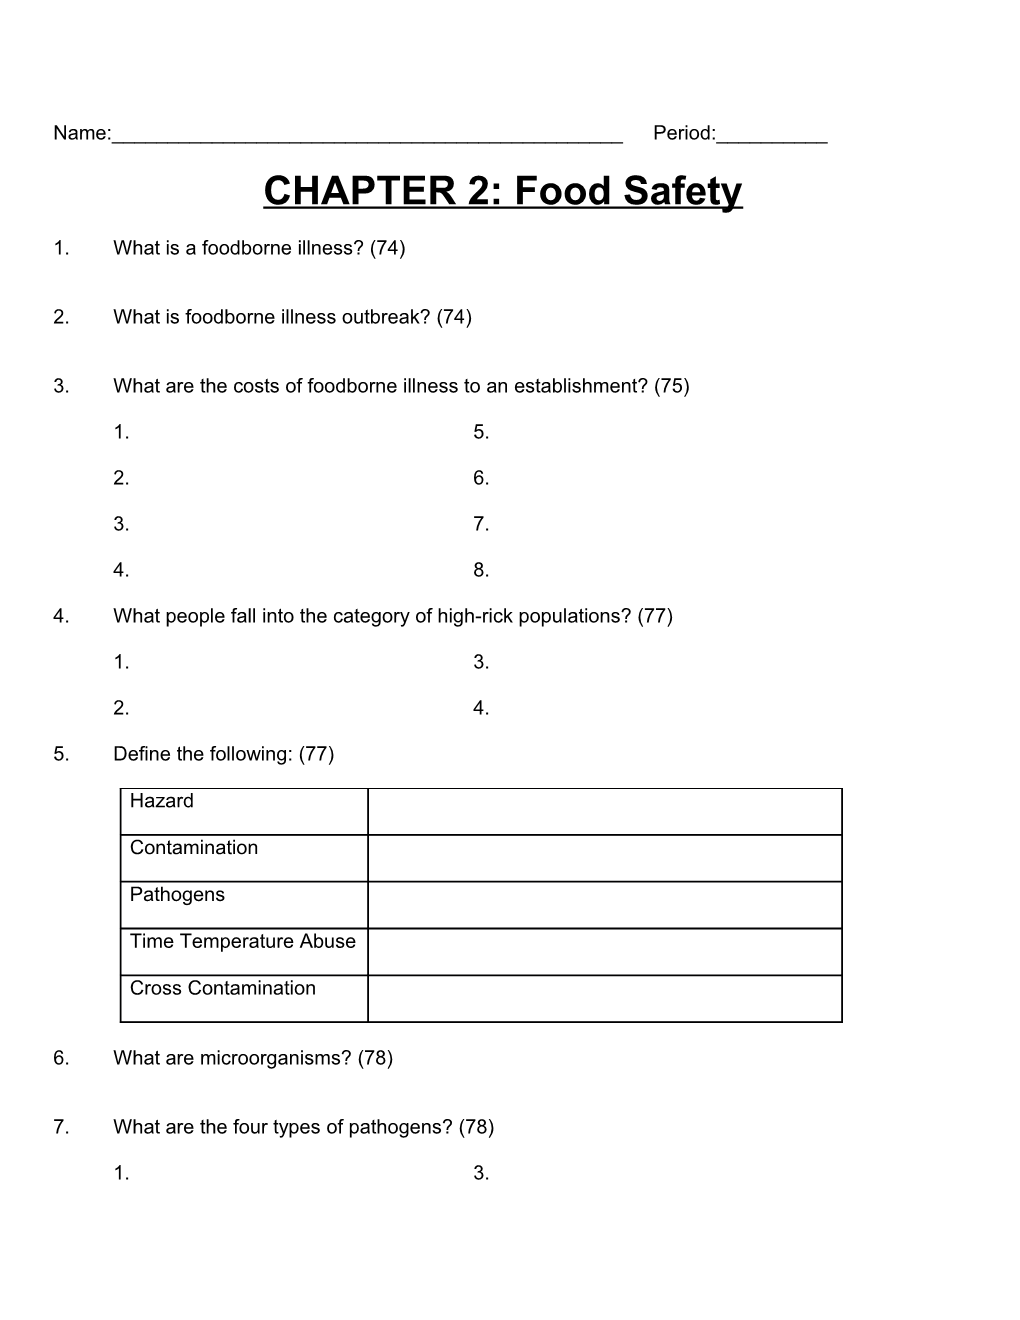 CHAPTER 2: Food Safety